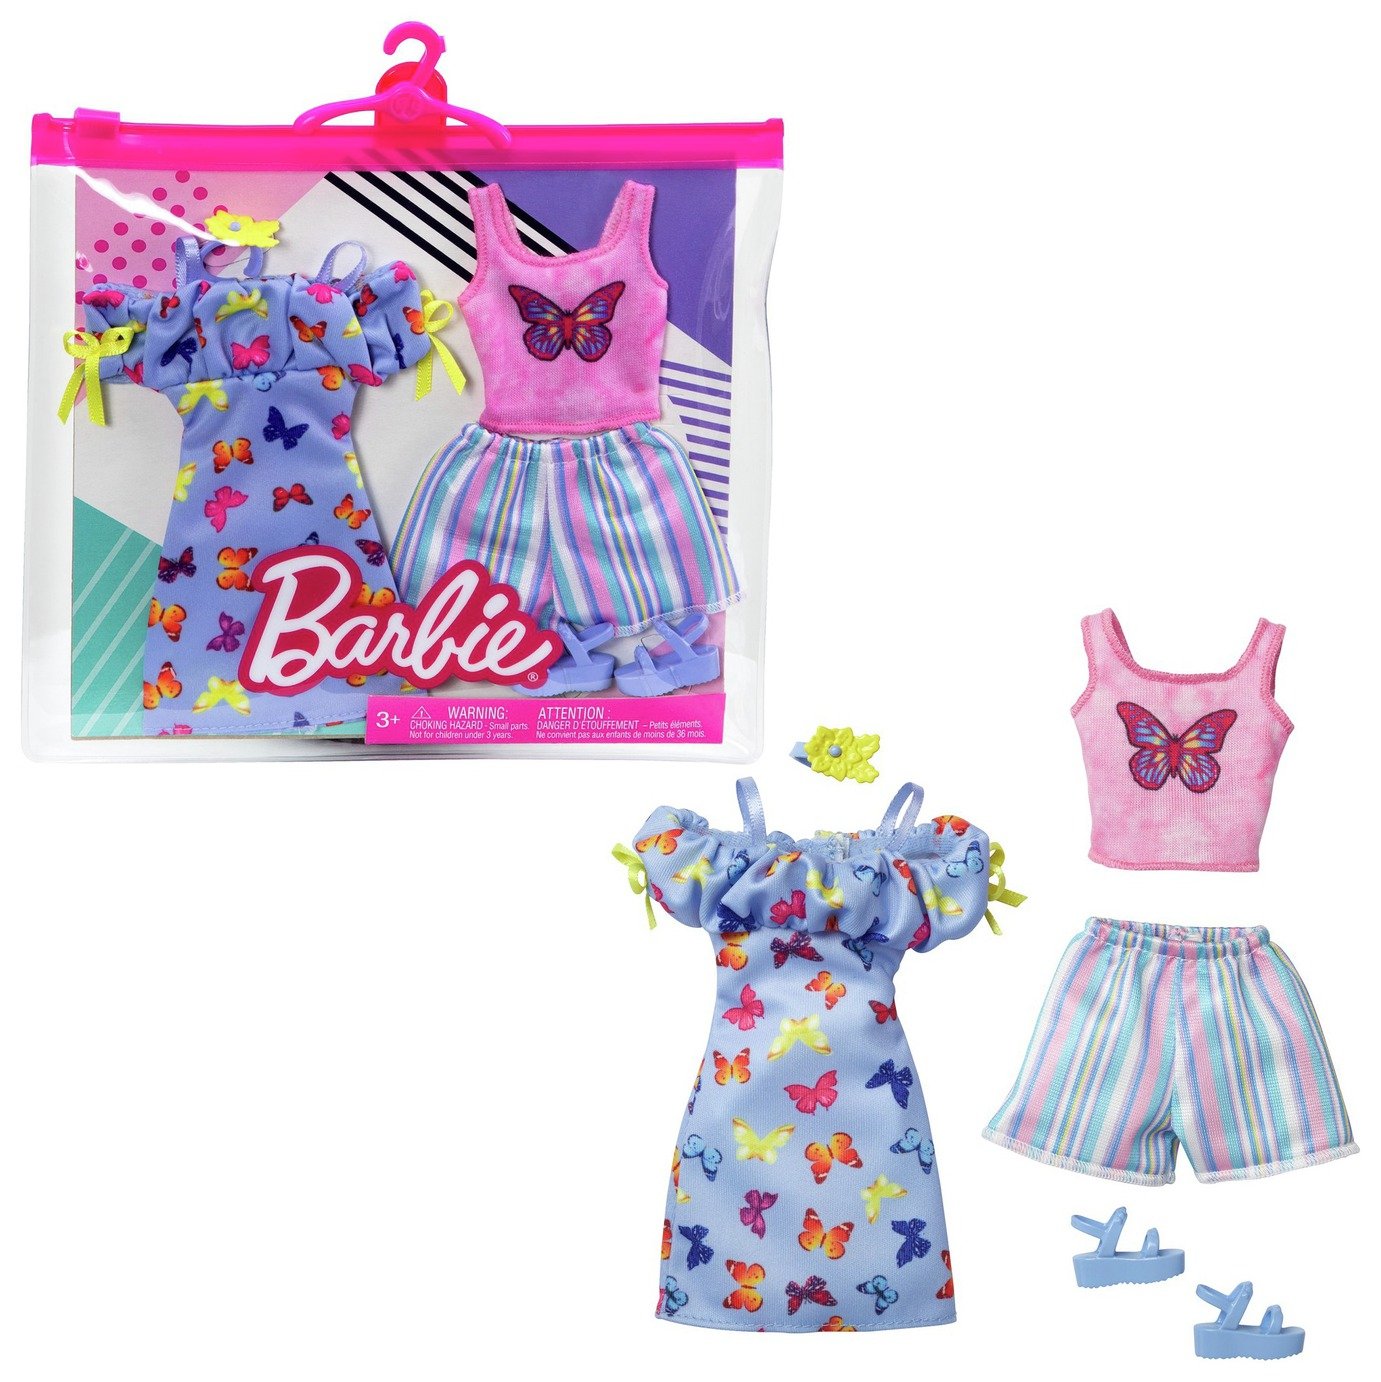 where can you buy barbie clothes